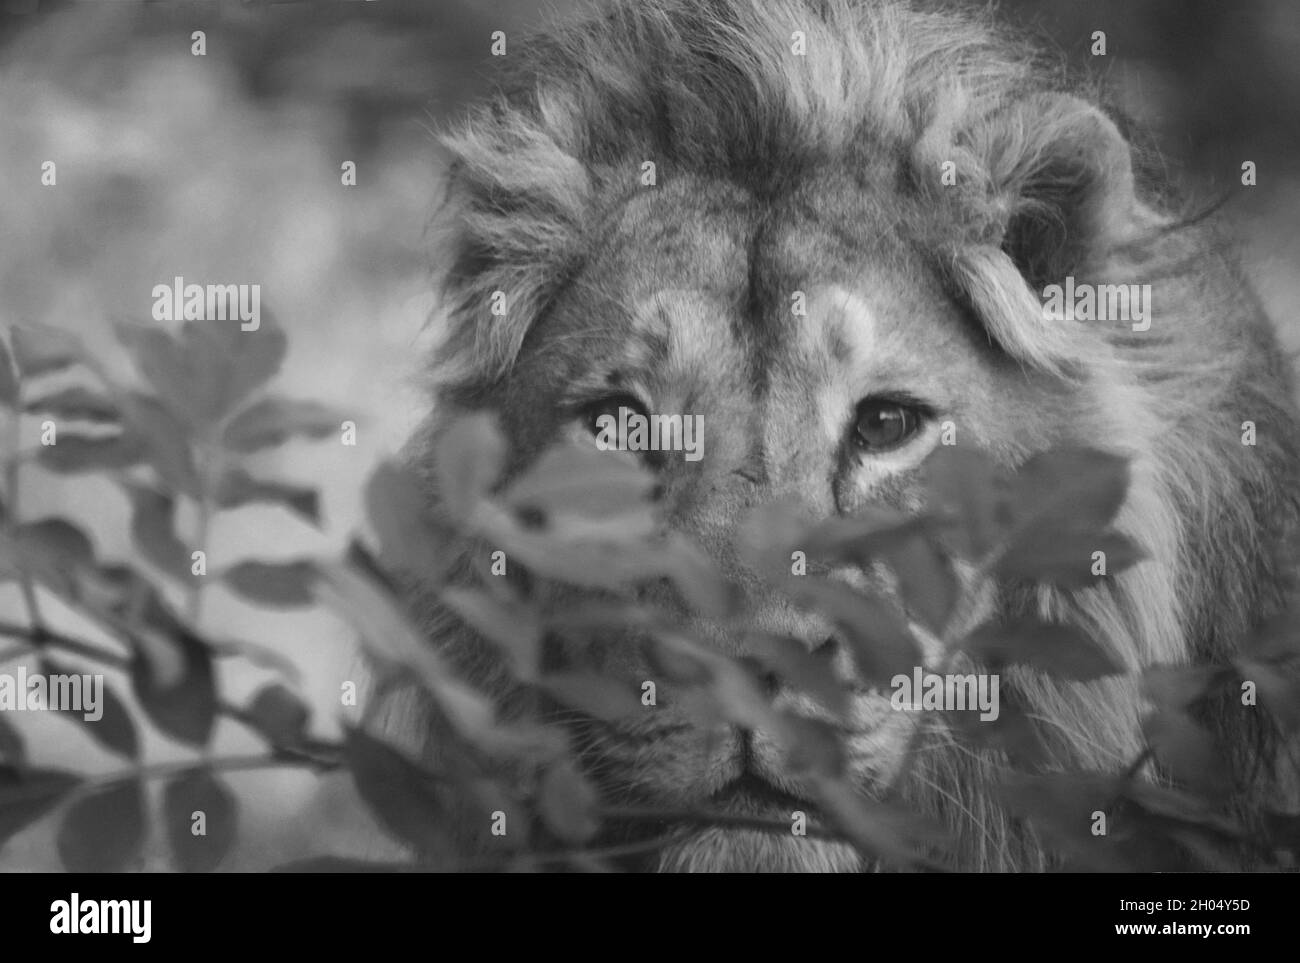 A black and white close up photo of a male lion’s face and head with its eyes clearly in focus staring through leafy bushes straight into the camera. Stock Photo